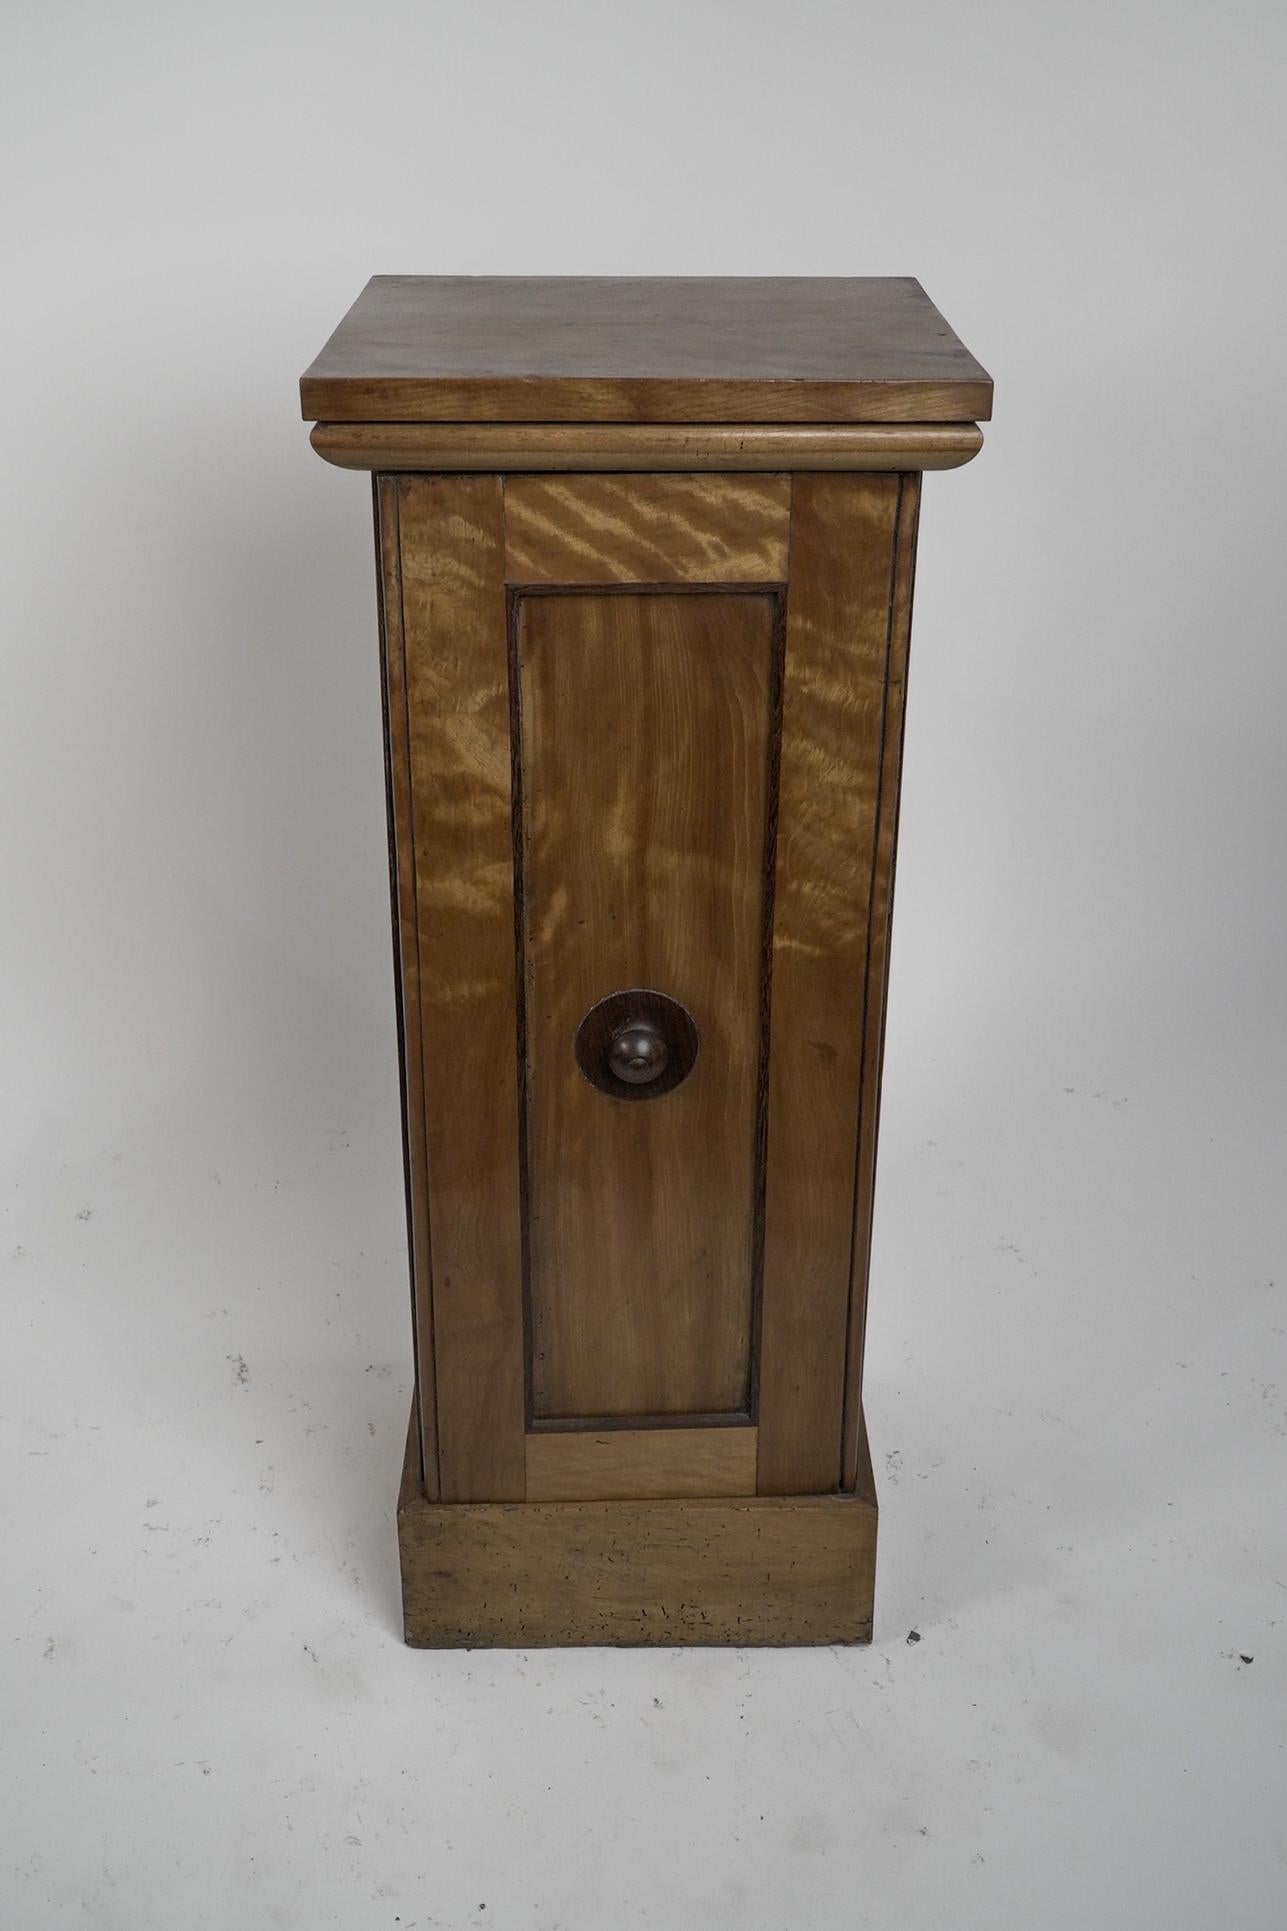 An Aesthetic Movement Satin Birch bedside cabinet with a contrasting turned Walnut handle to the door. Circa 1870. 
SALW.
